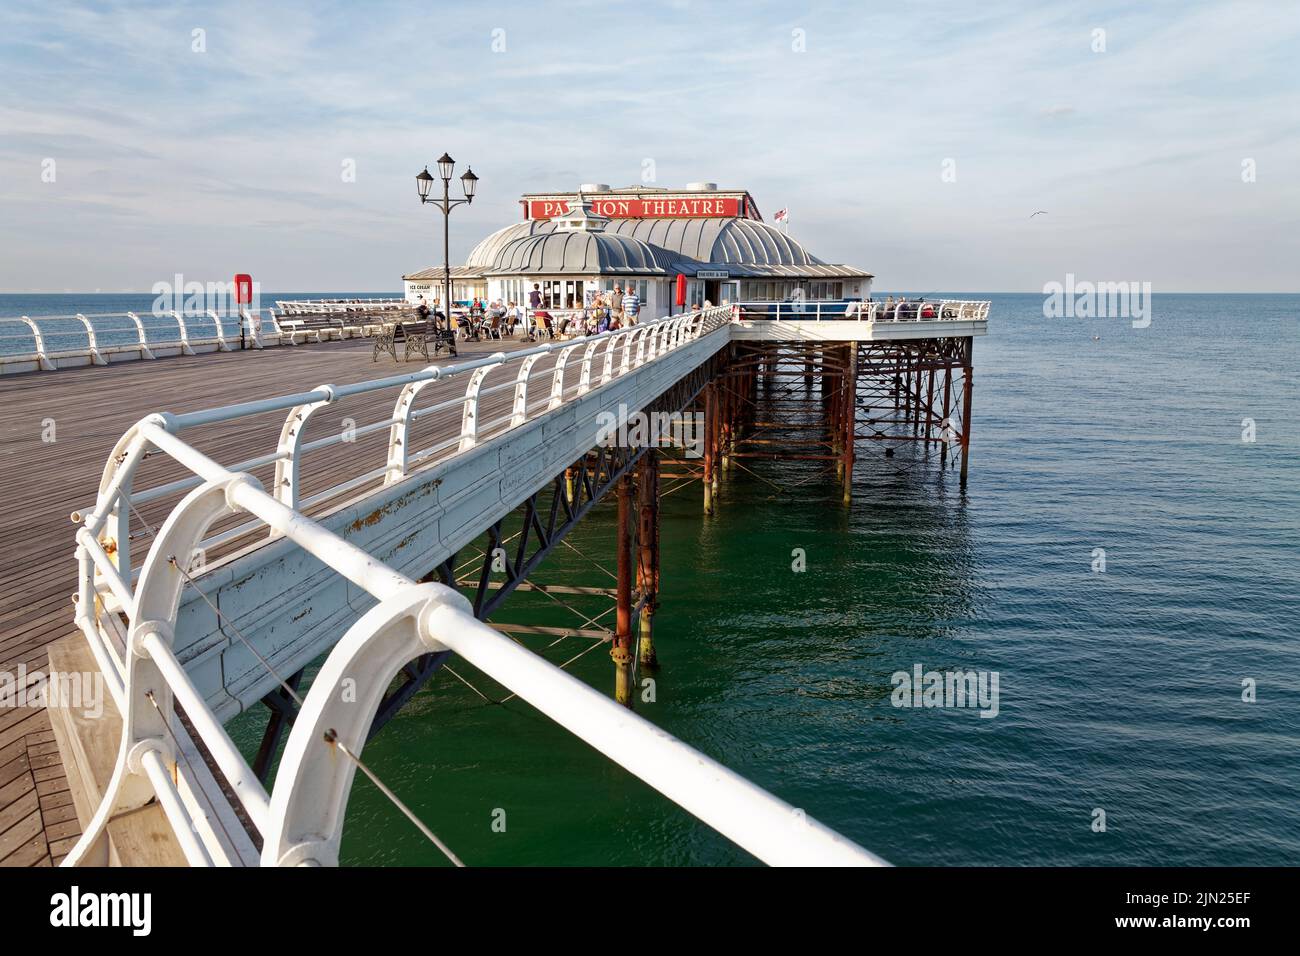 Cromer pier with the Pavilion Theatre. Norfolk, England. Stock Photo